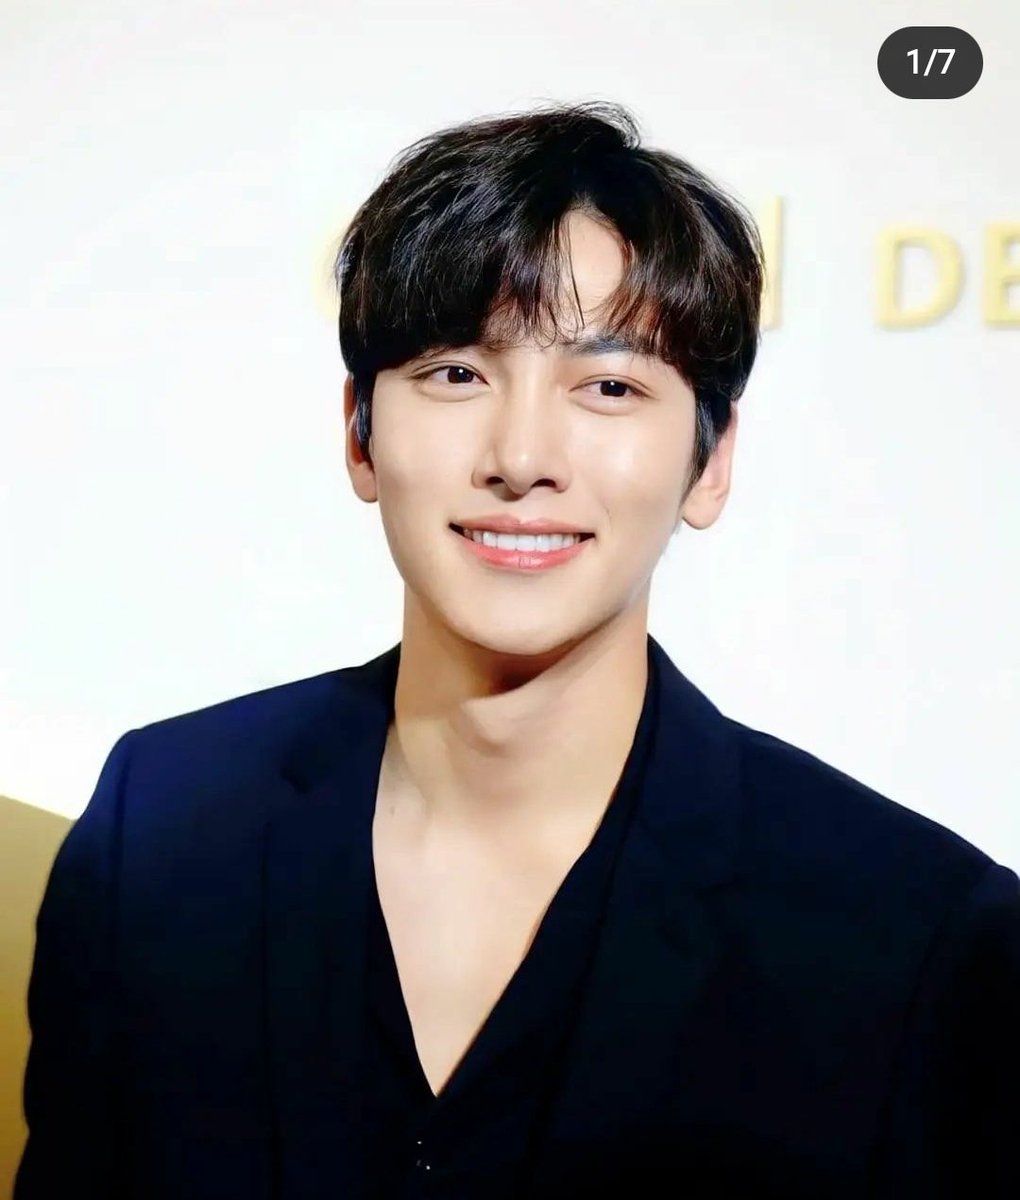 #100MostHandsomeMen2021 
One name to win...
#JiChangWook